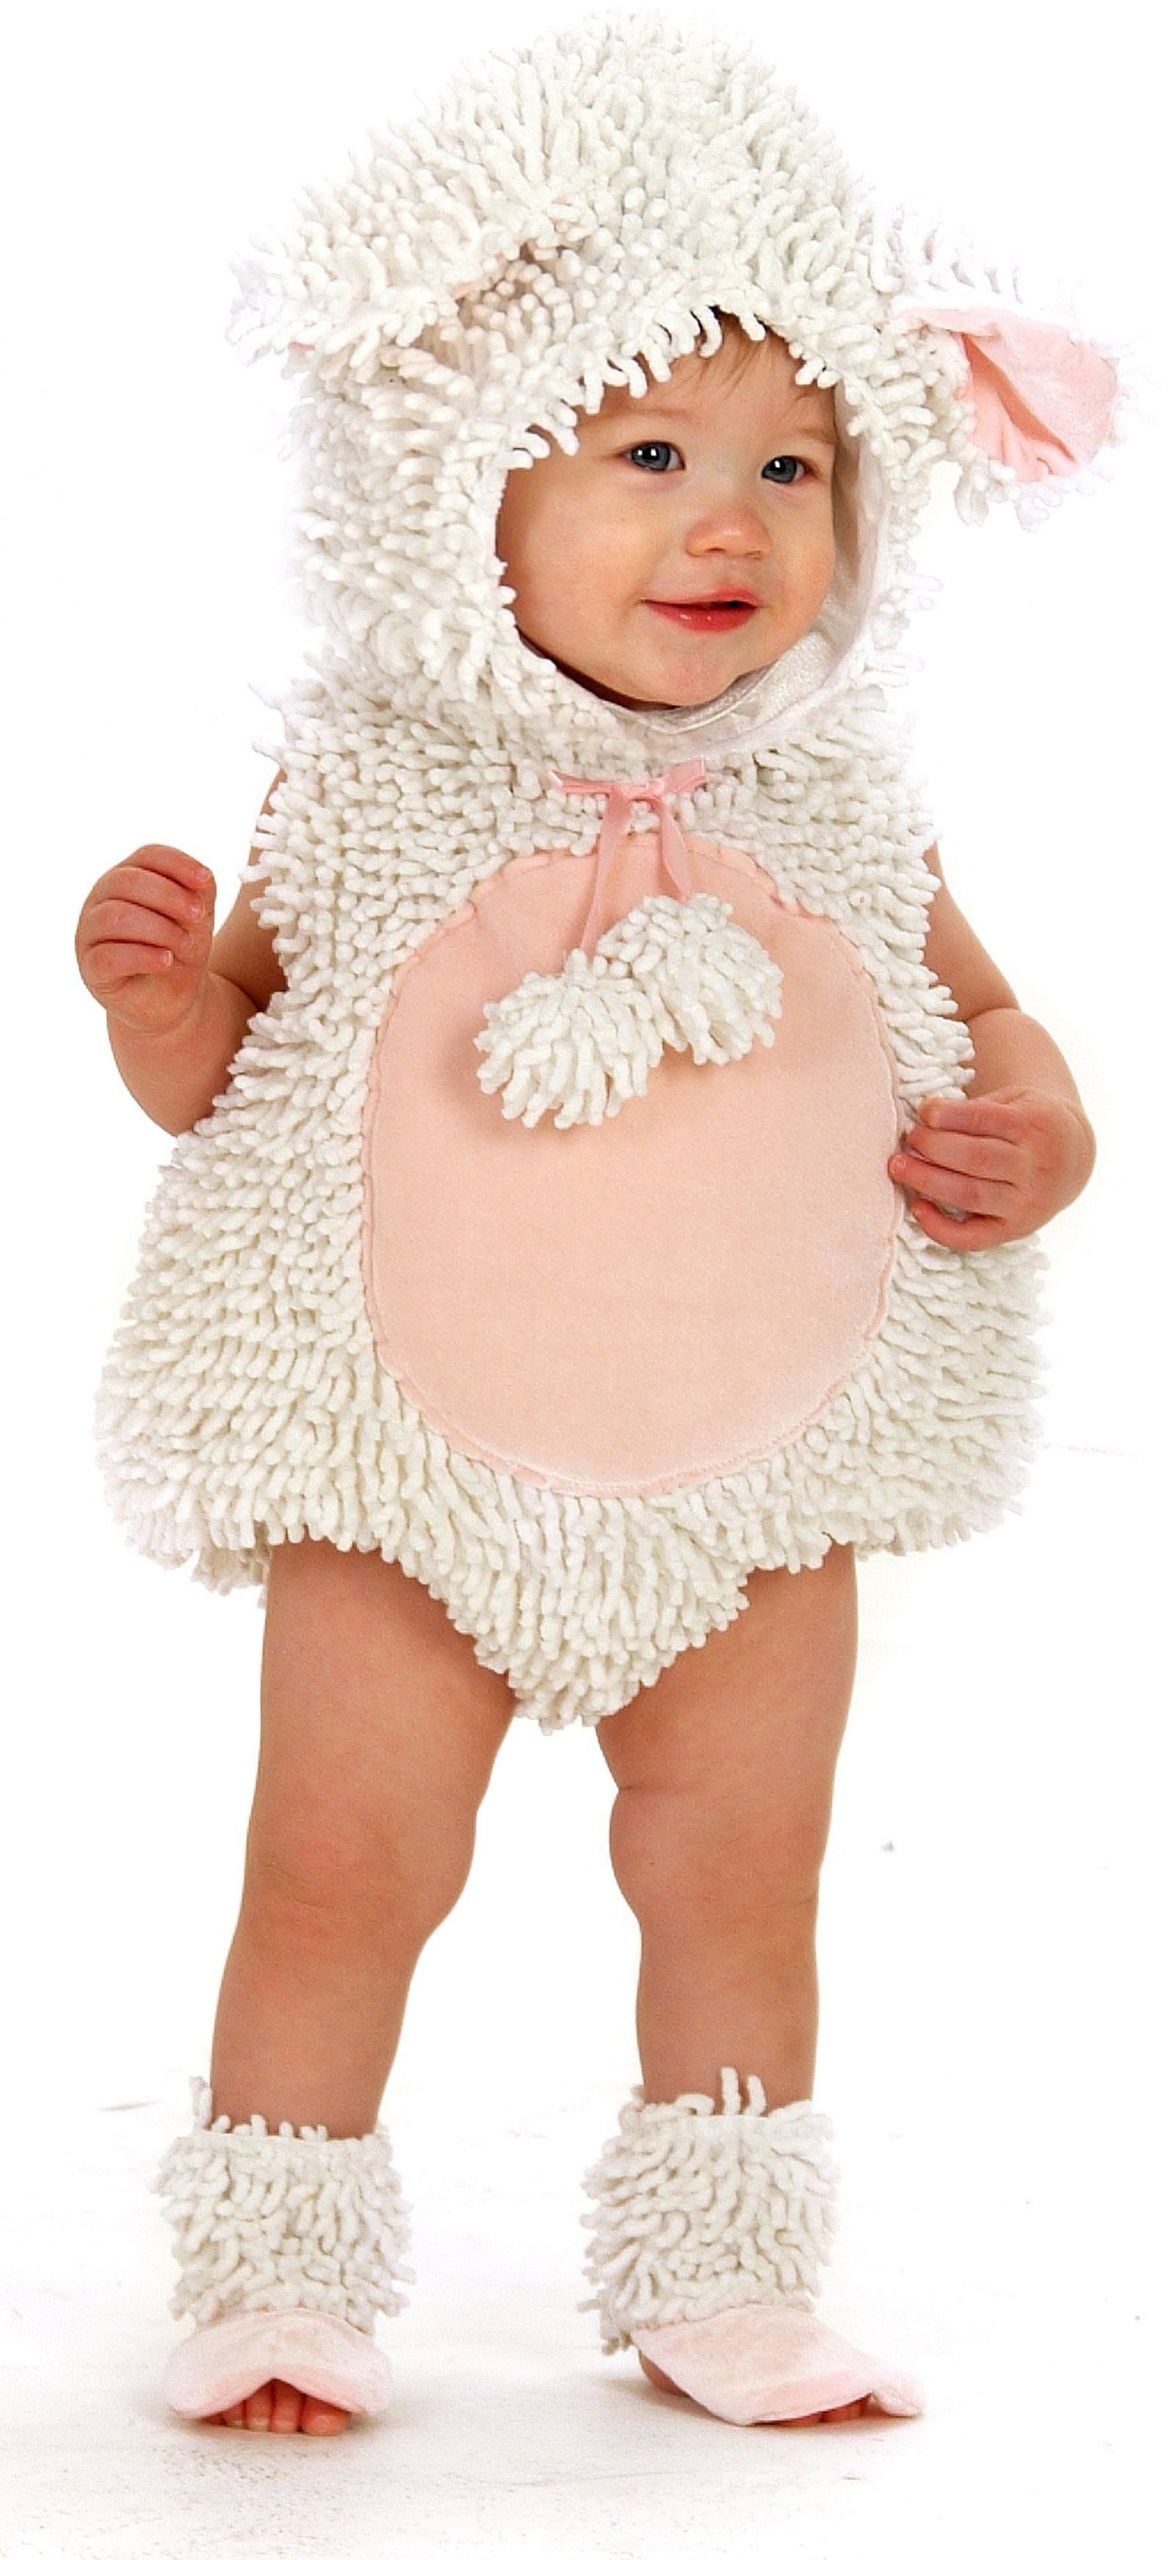 Easter Costume Ideas
 Cute Easter Costumes for Kids Infants and Newborns